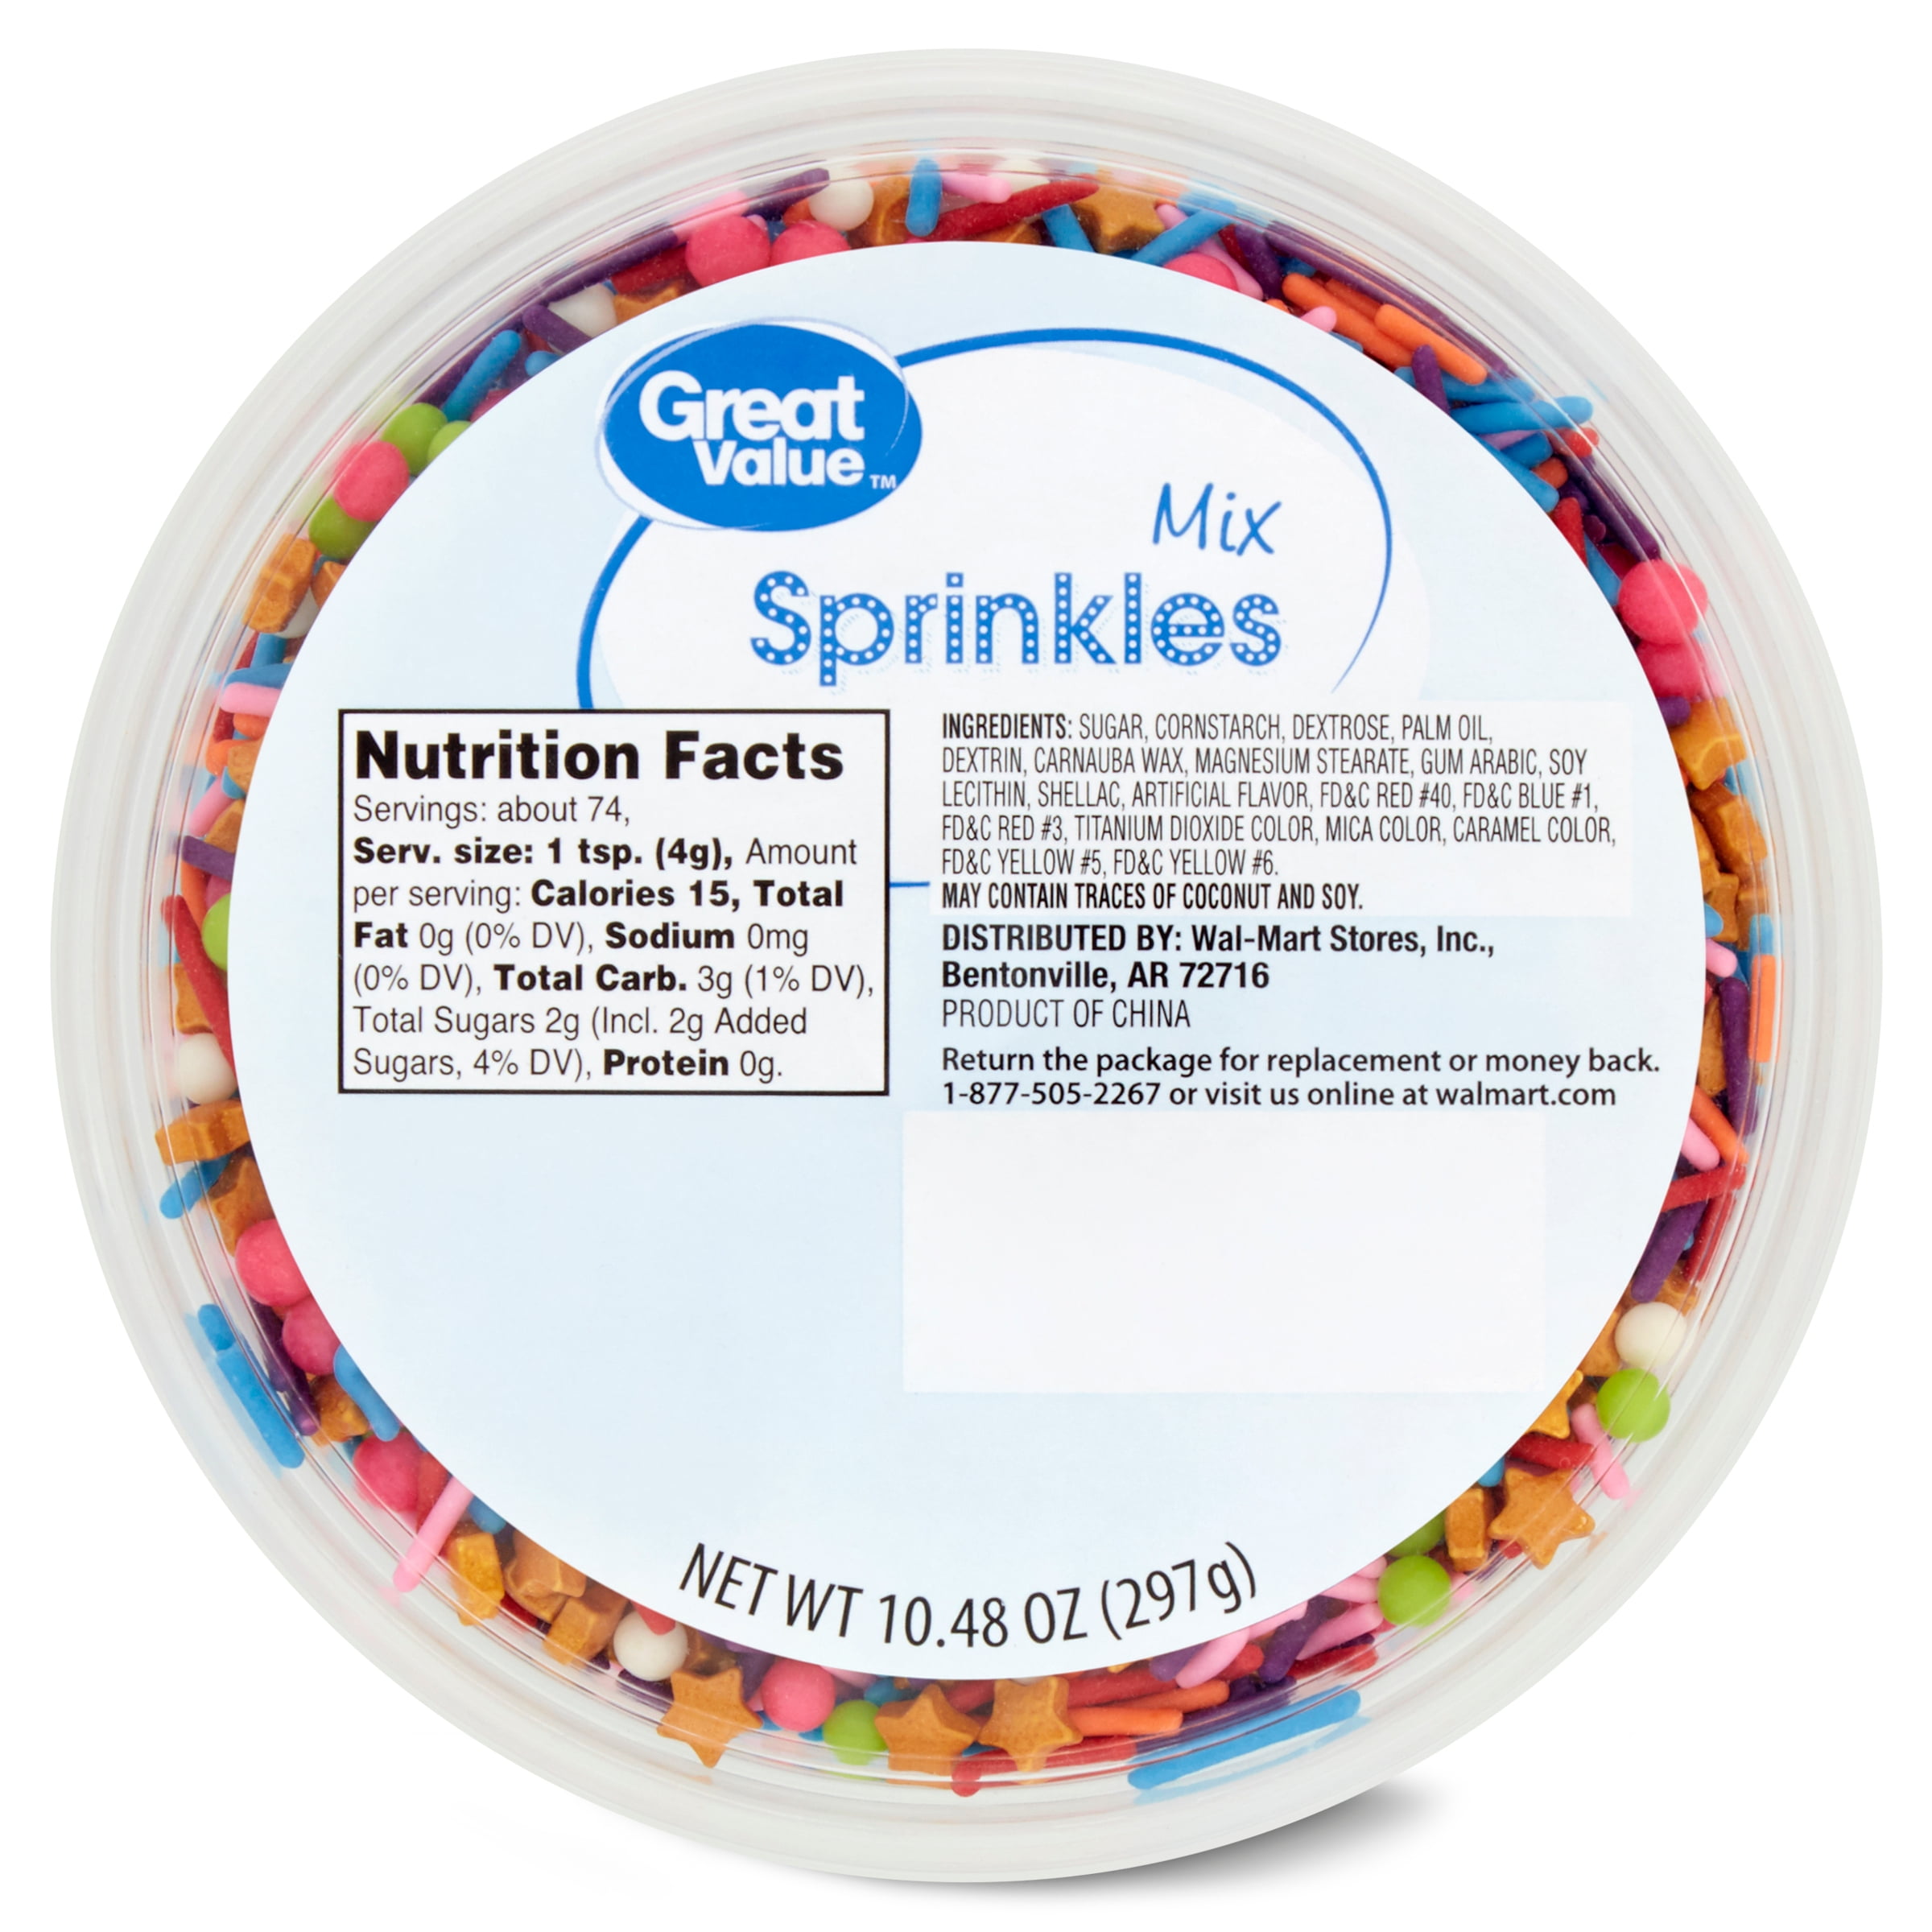 Great Value Magical Sprinkles Mix Tub, 10.48 oz.